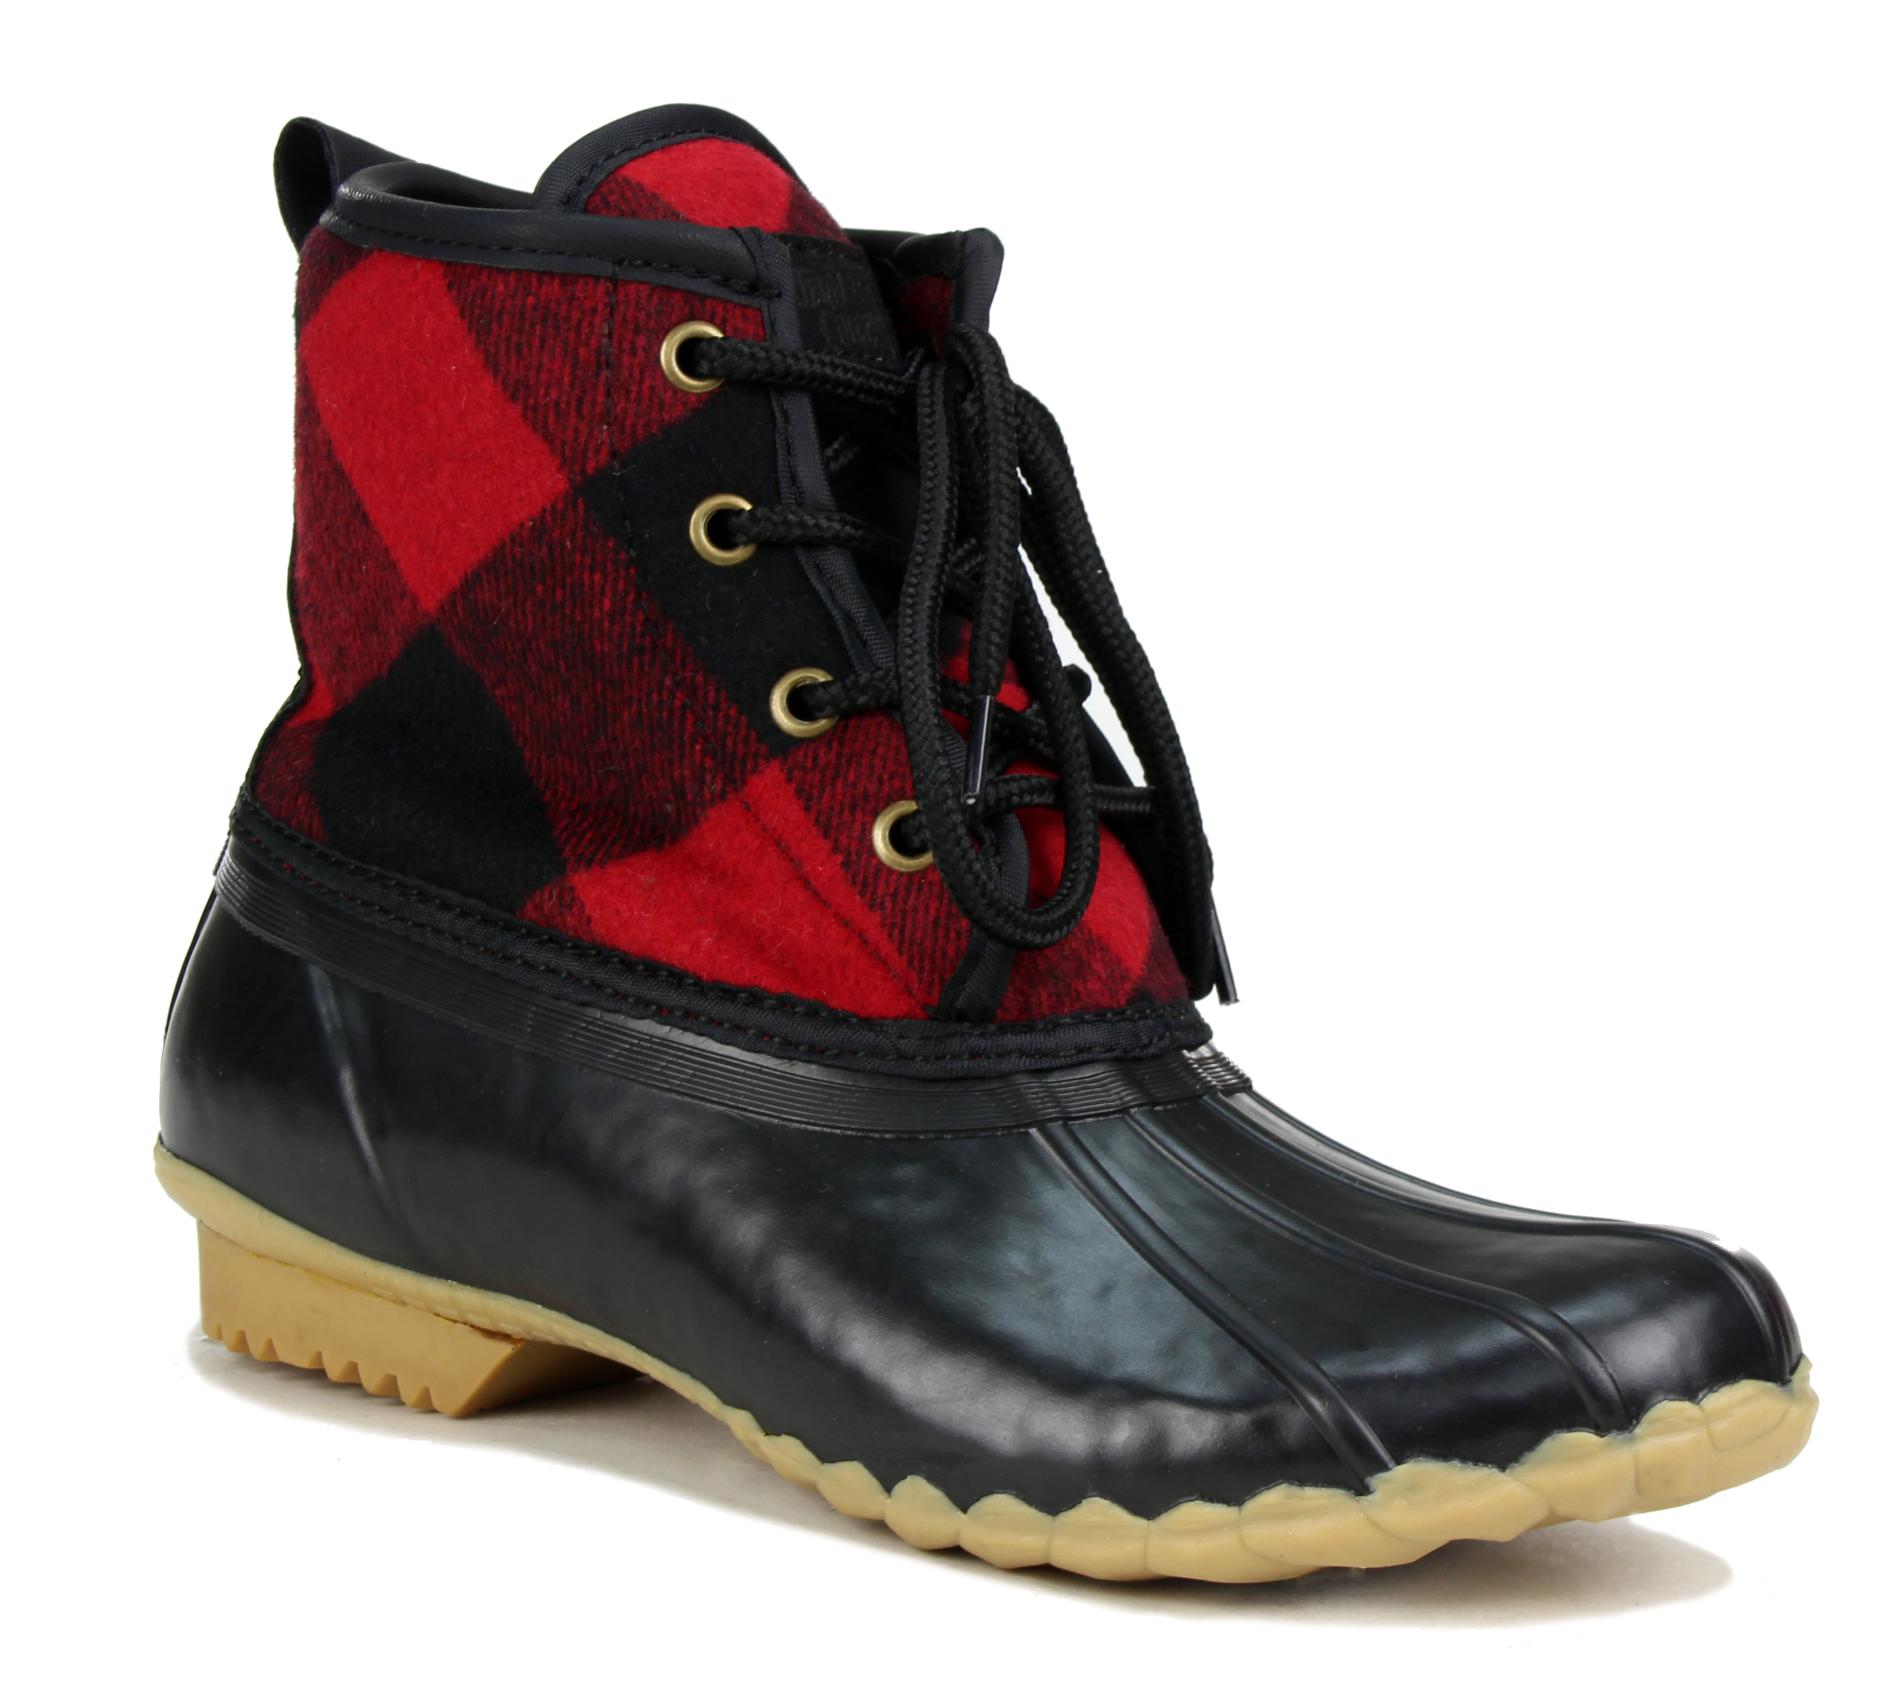 Western Chief Women's Winter/Weather Boot - Red/Black